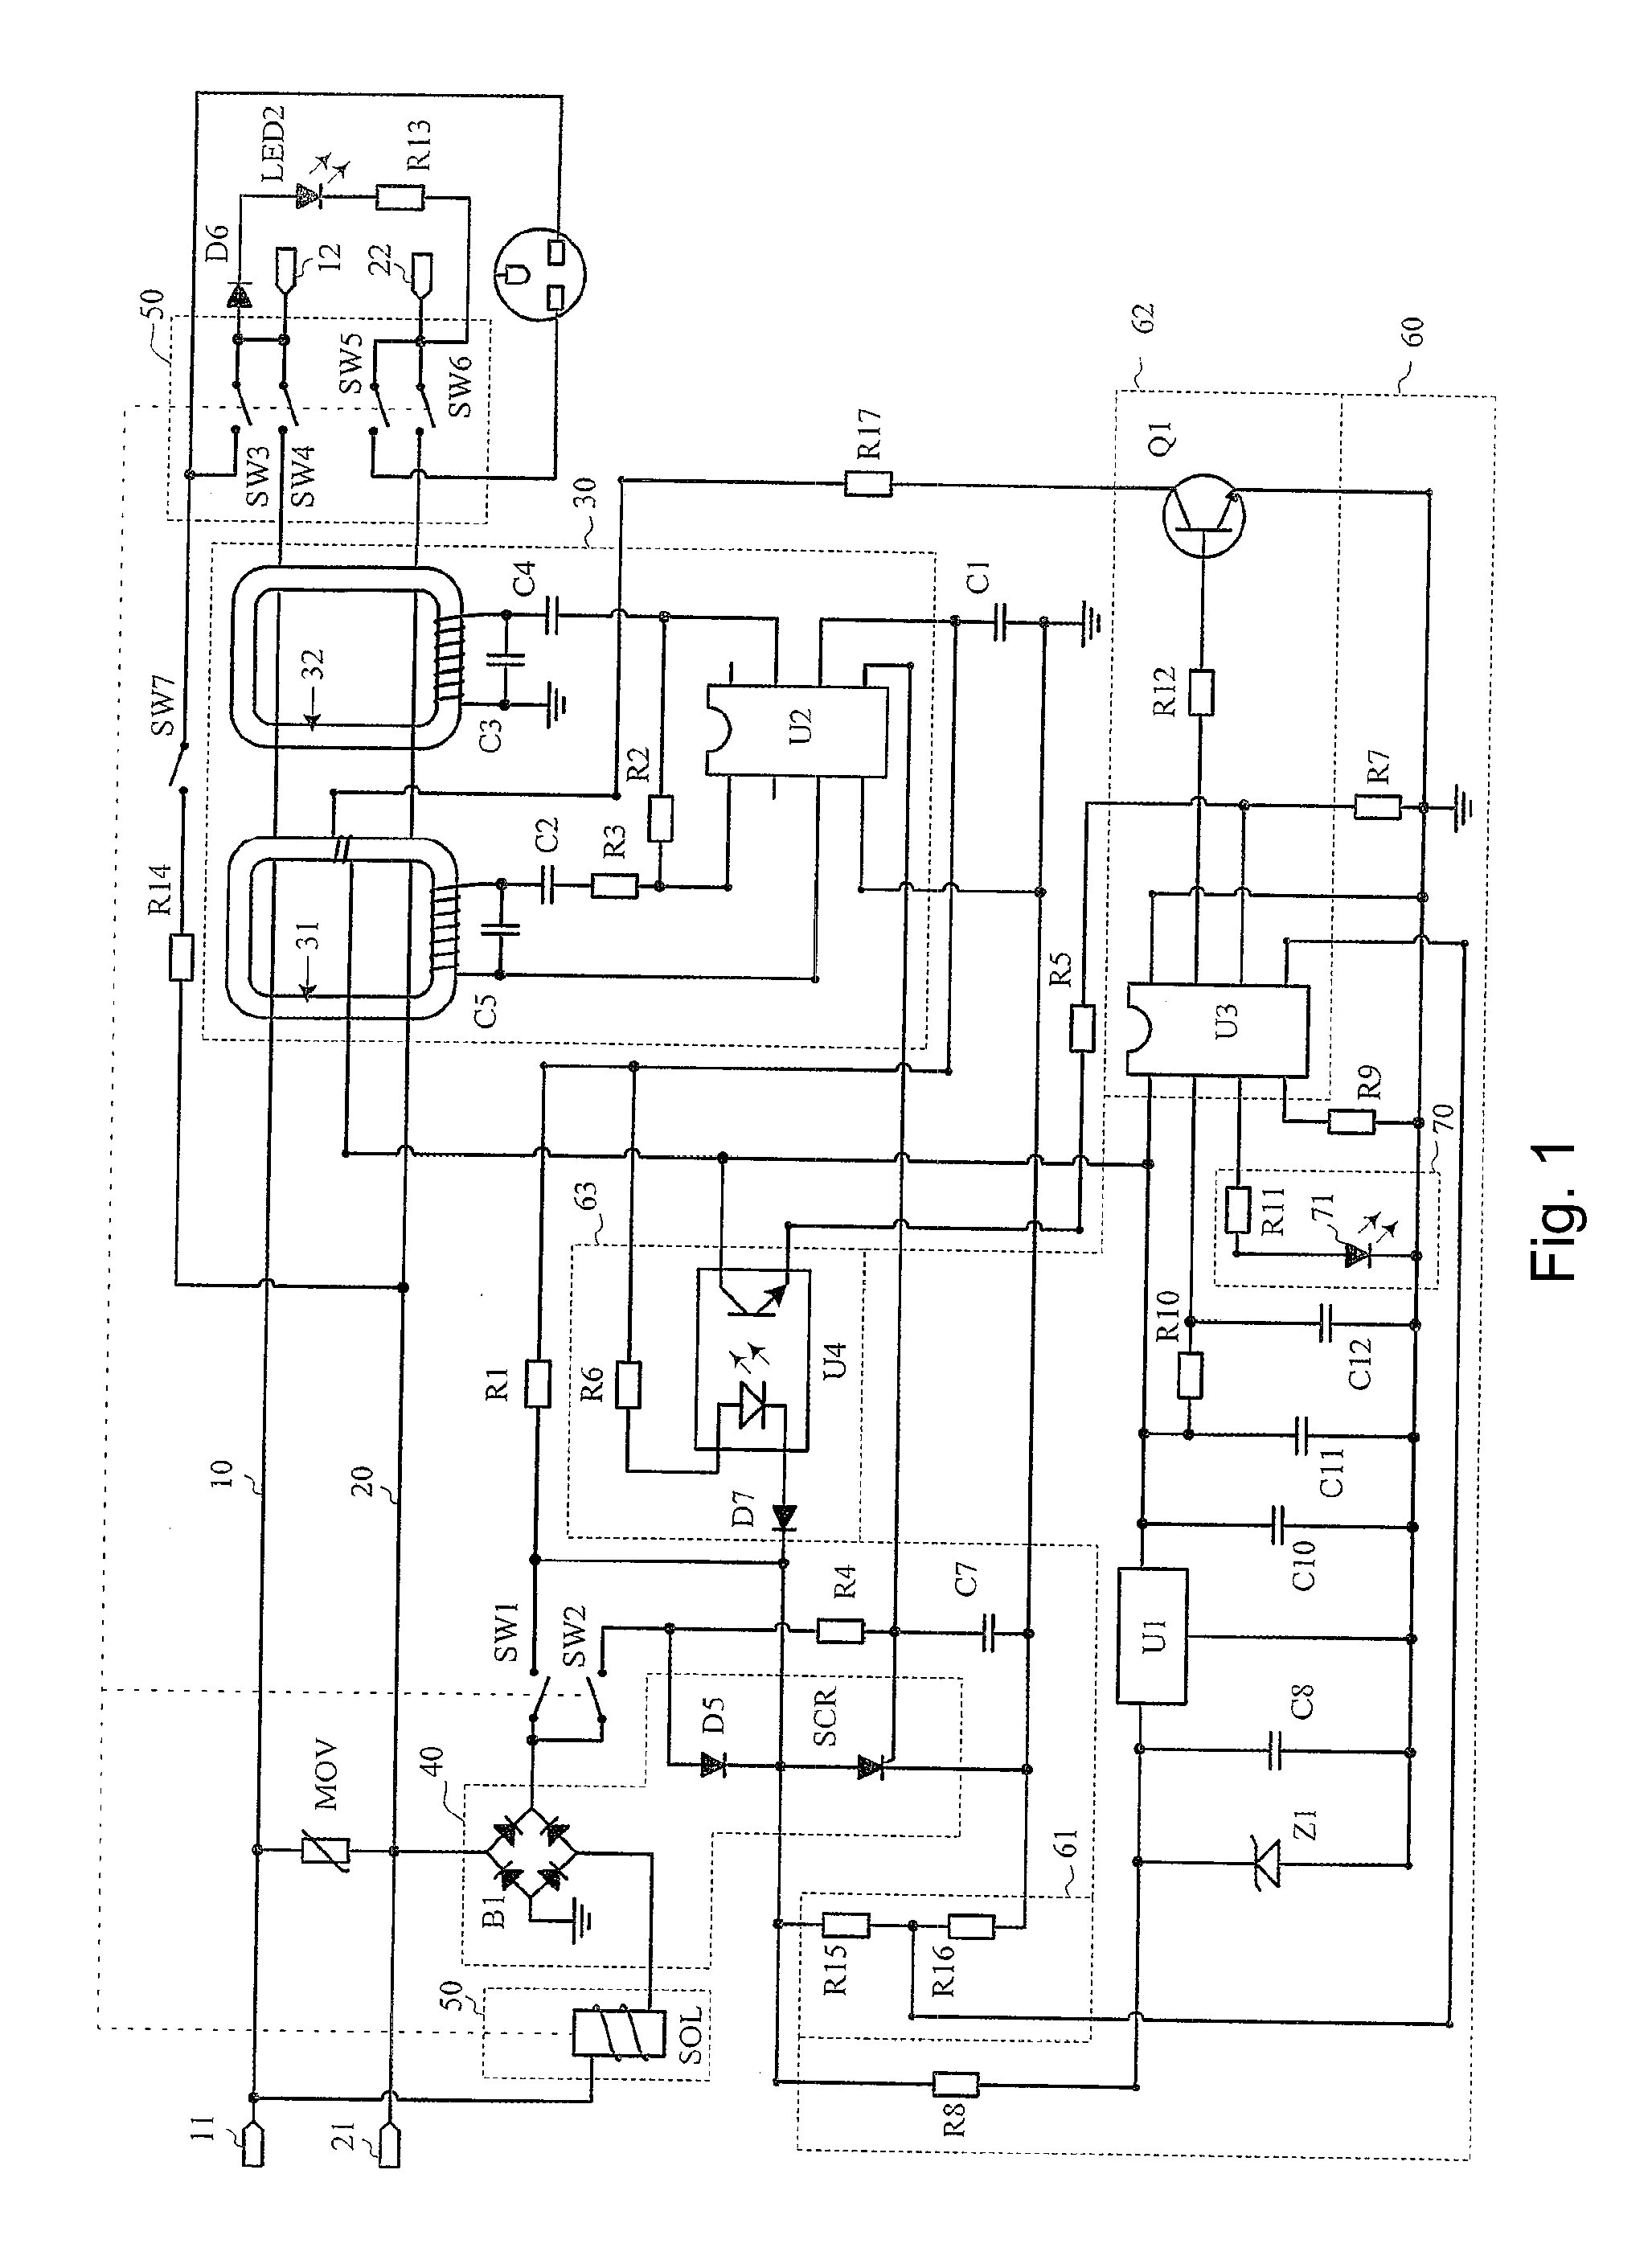 Circuit interrupter device with self-test function